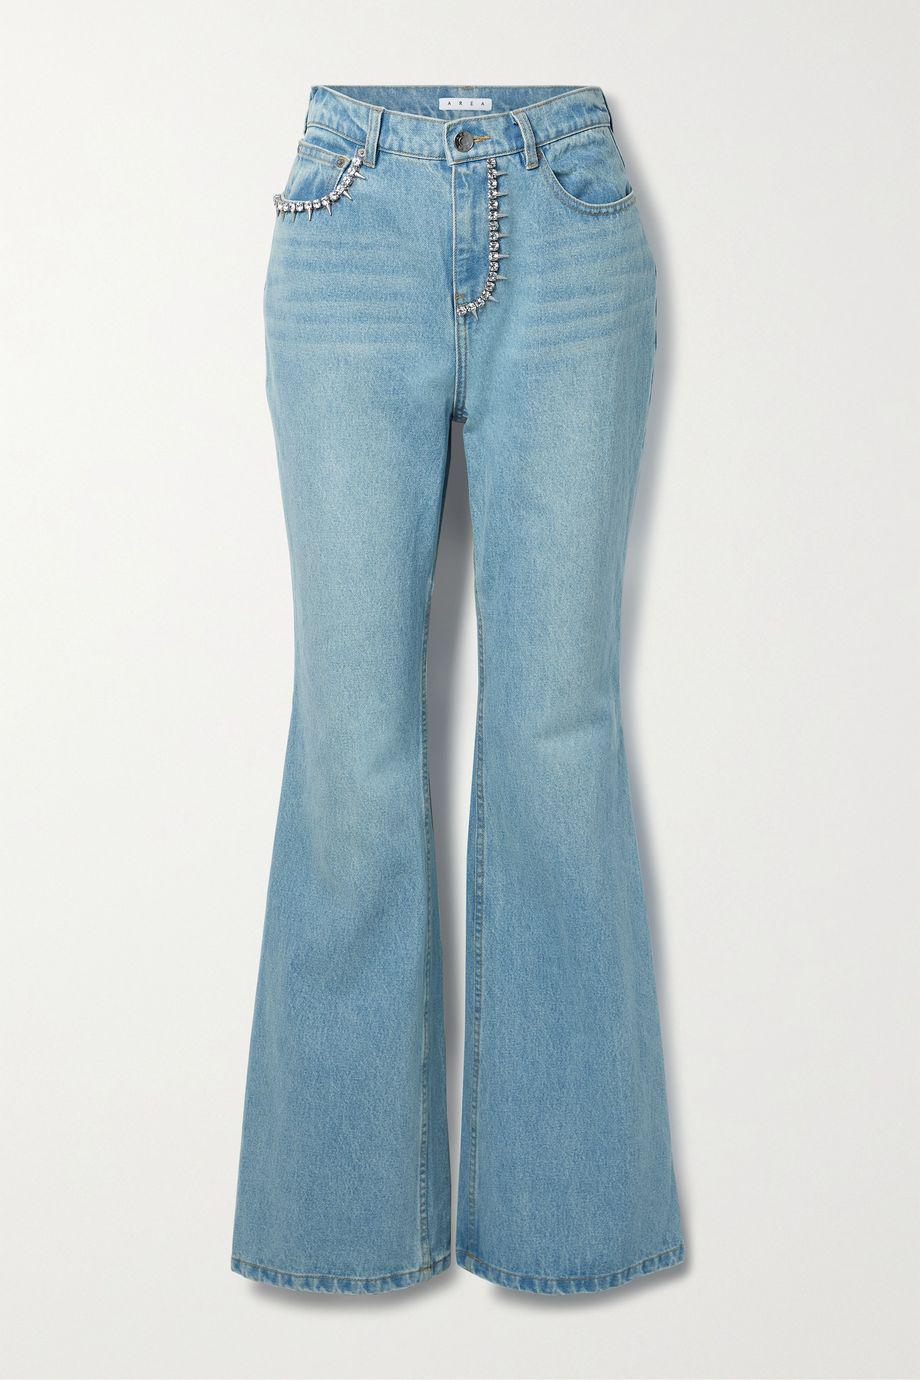 Crystal-embellished cutout high-rise bootcut jeans by AREA